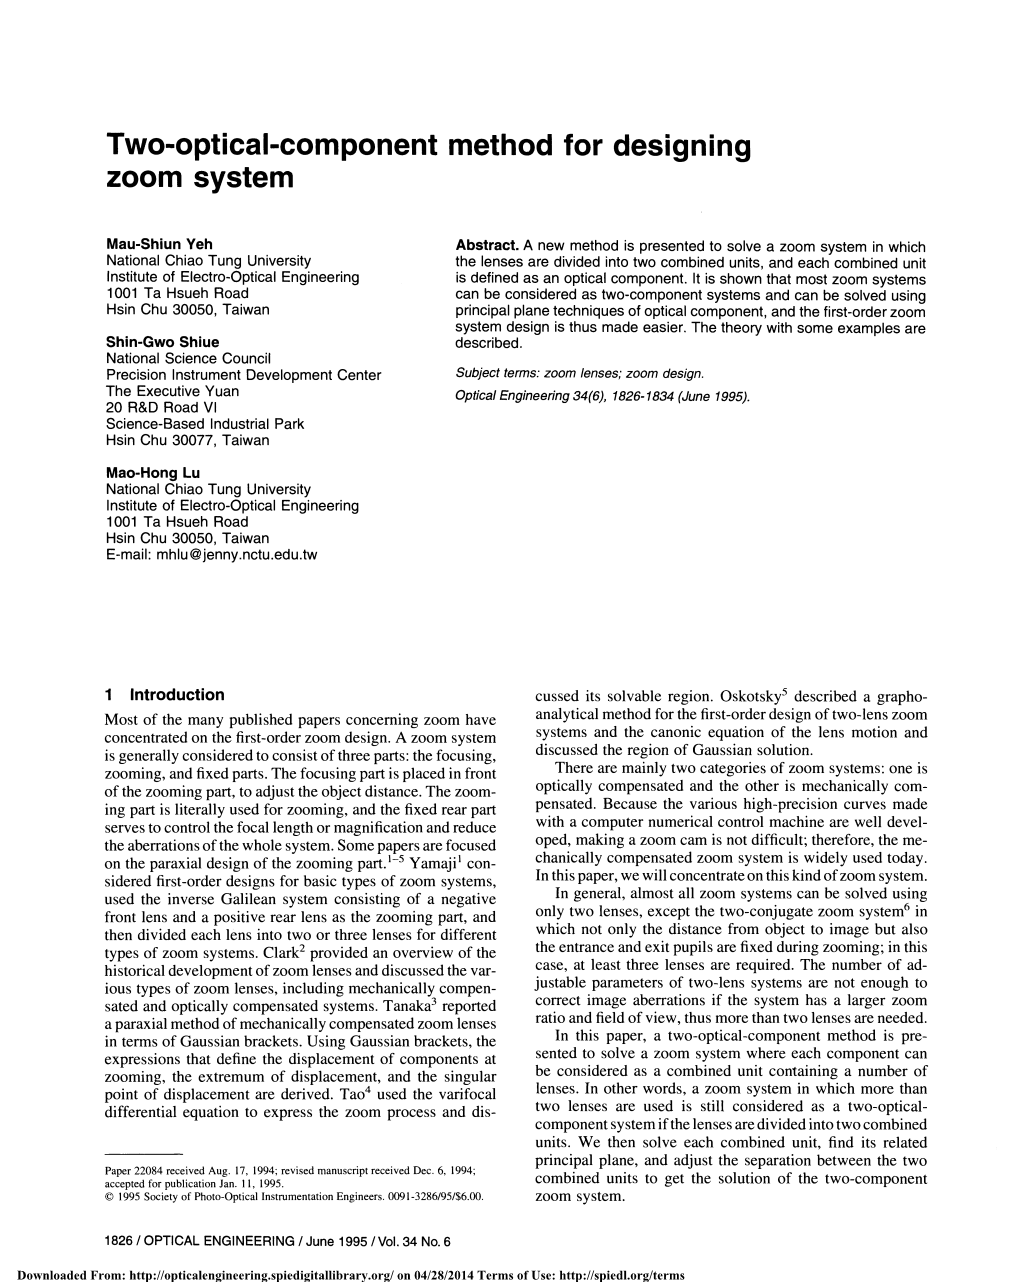 Two-Optical-Component Method for Designing Zoom System